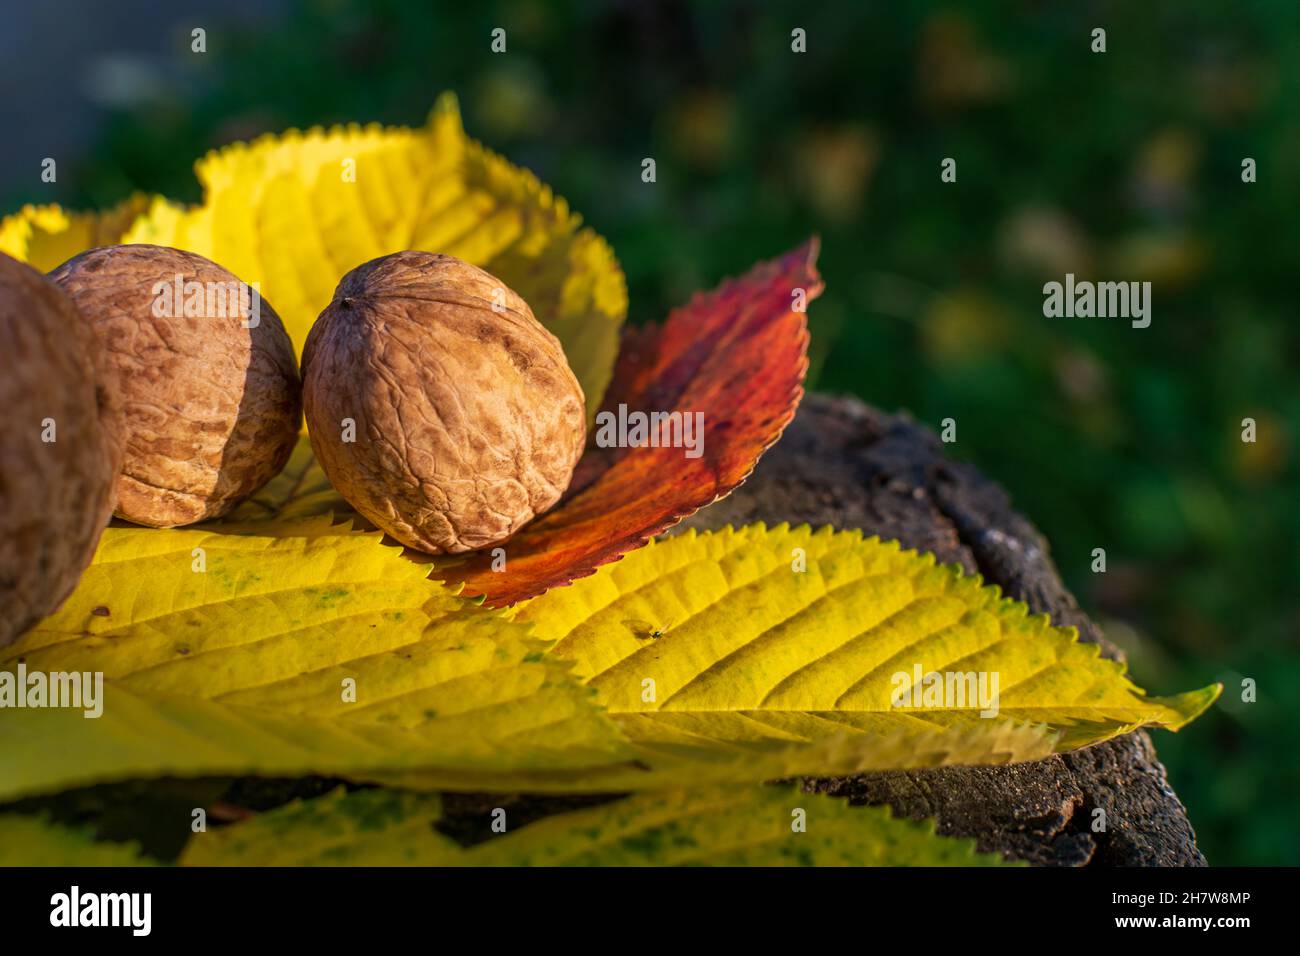 Natural walnuts among fall colored leaves enlightened by sunset light. Stock Photo